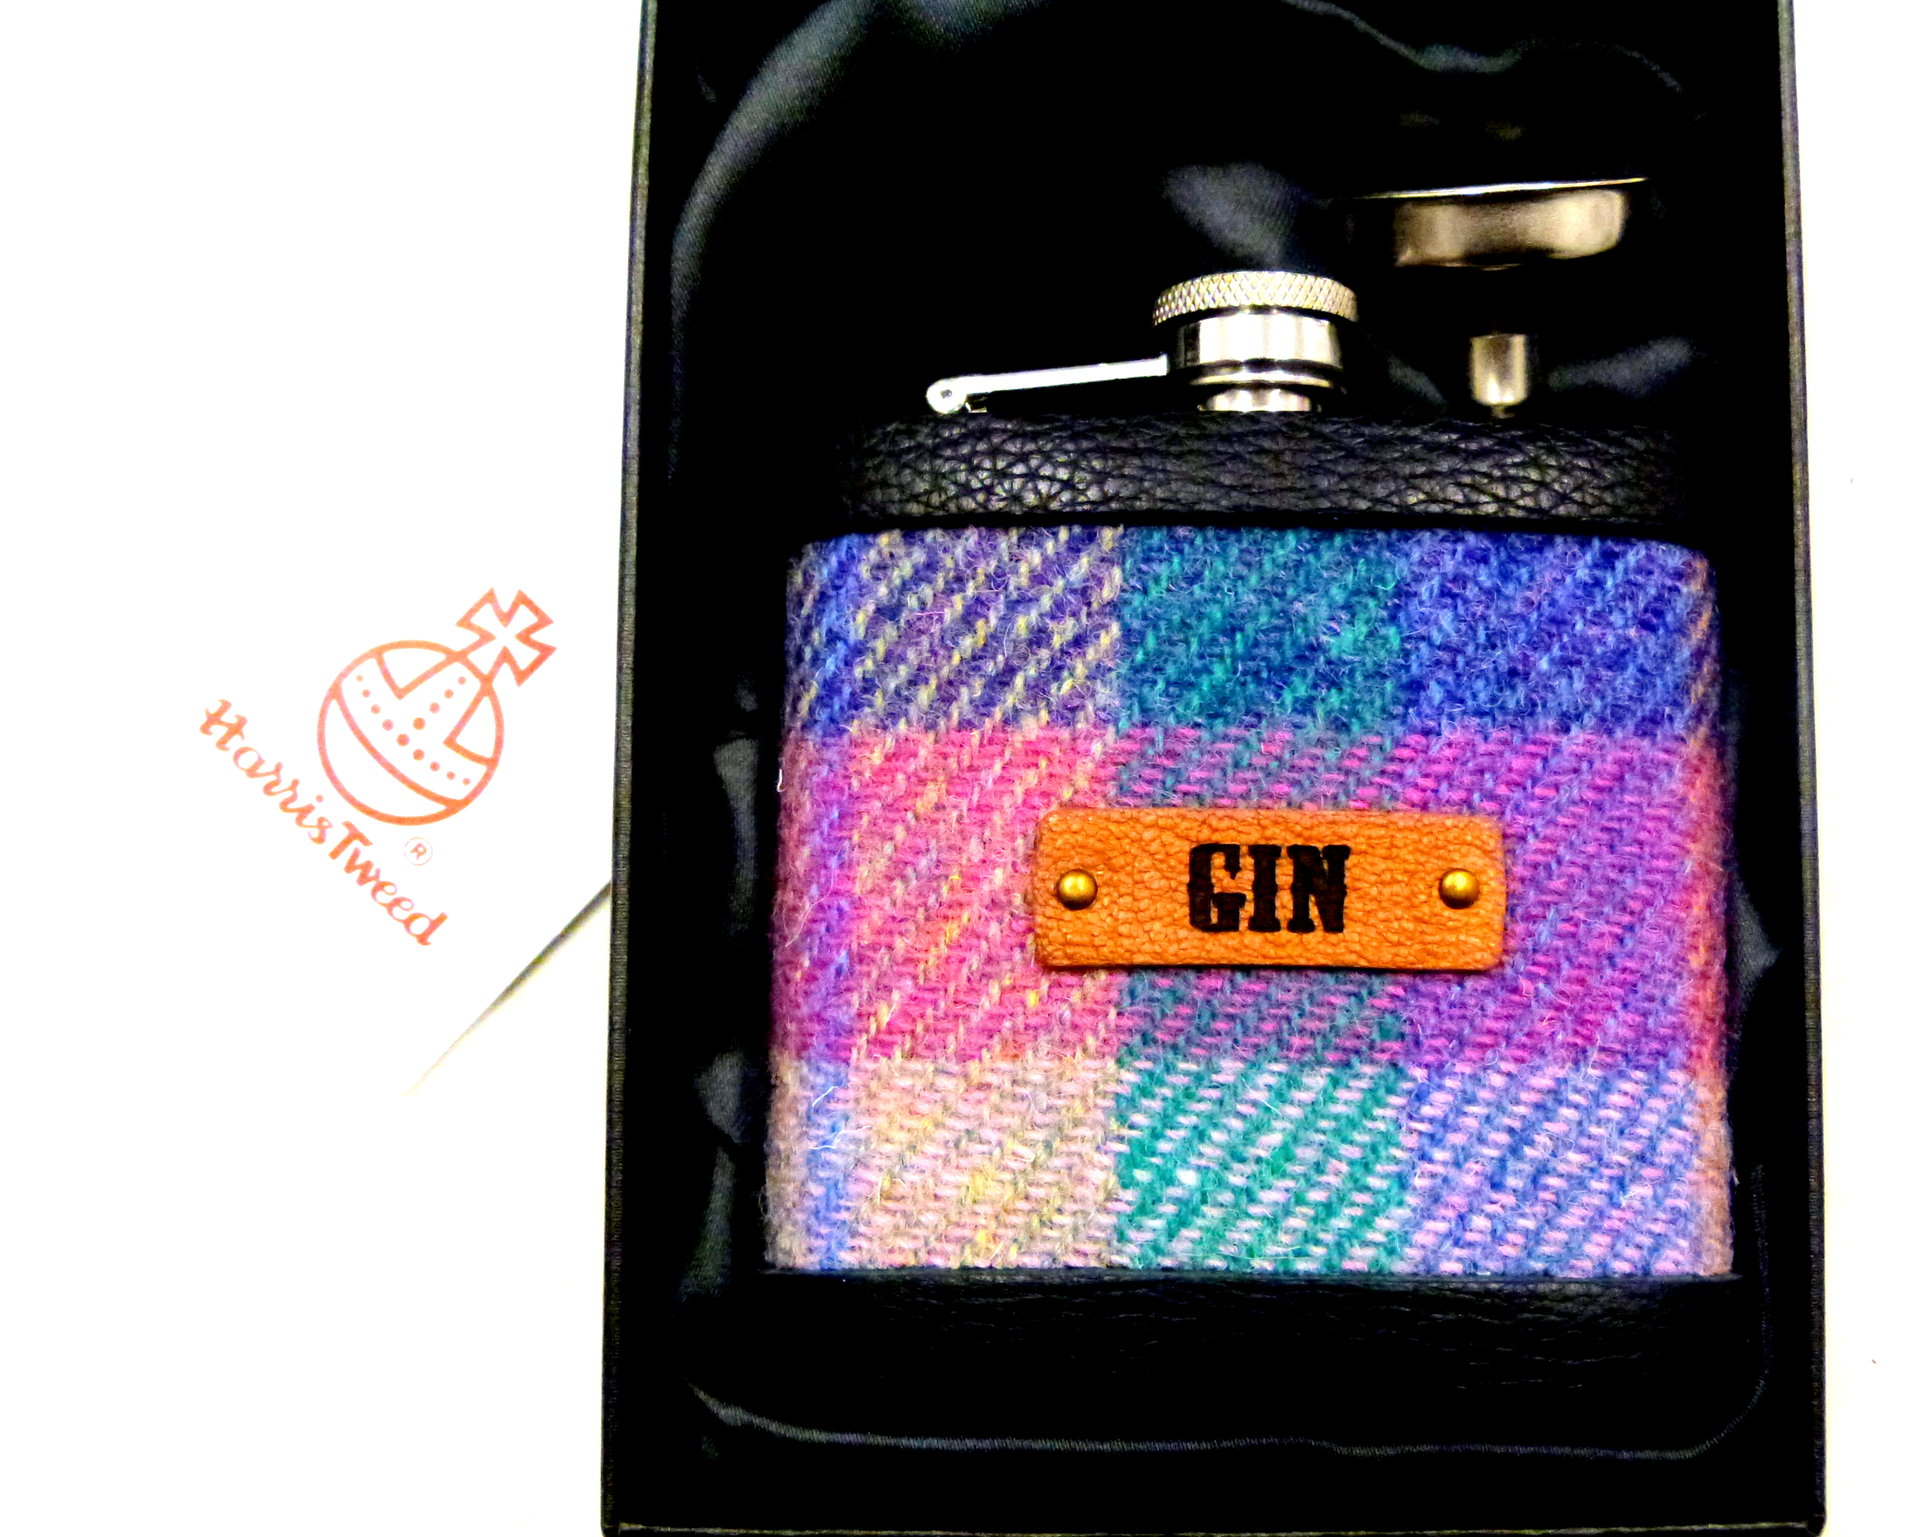 Harris Tweed Gin hip  flask, purple, pink and jade green, Scottish gift for her or him ideal Christmas, retirement Gin lovers present